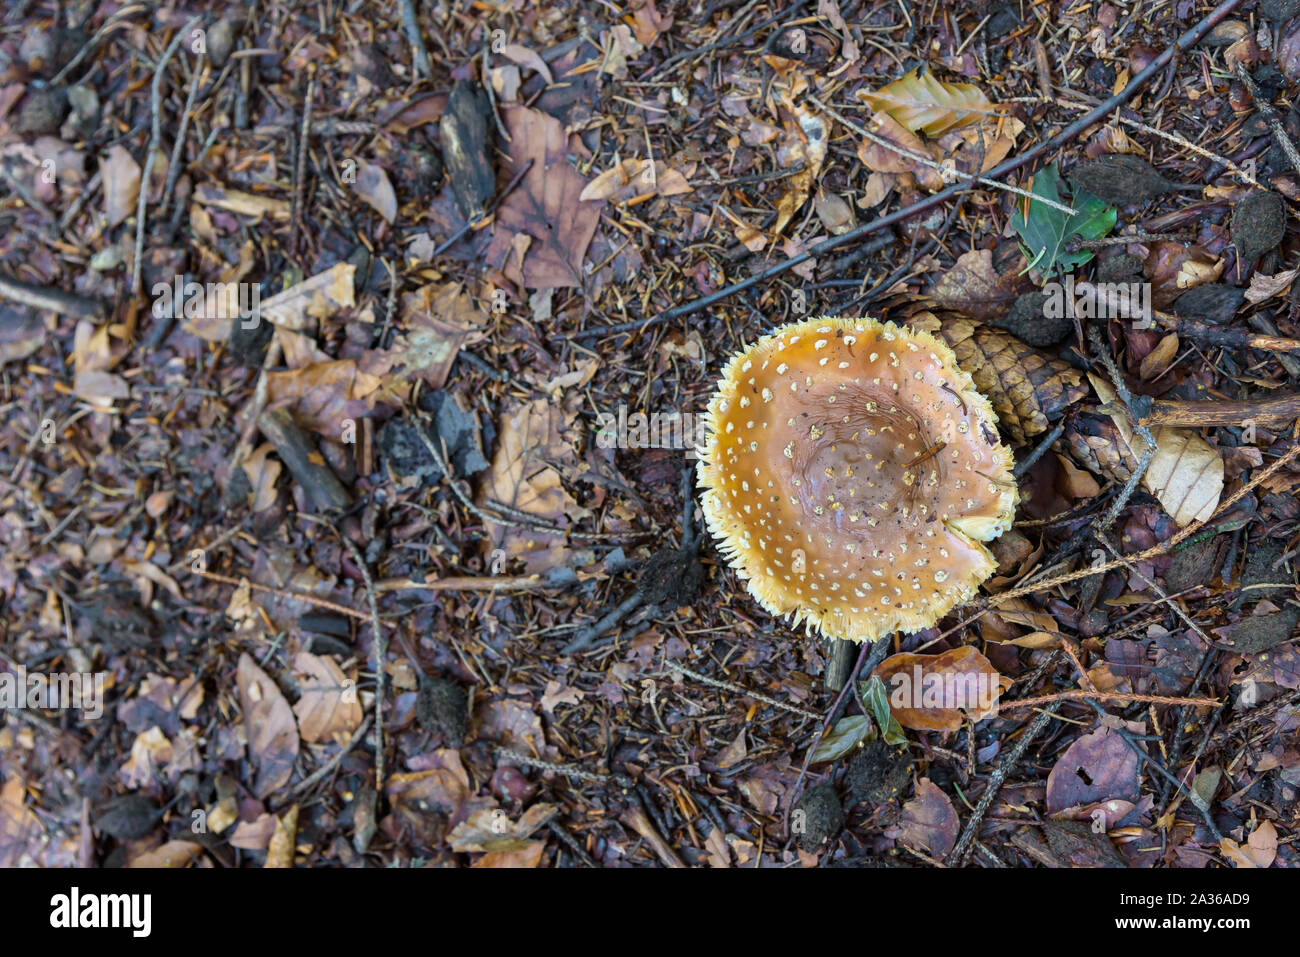 Amanita muscaria - white toadstool in a forest. Shallow depth of field. Stock Photo